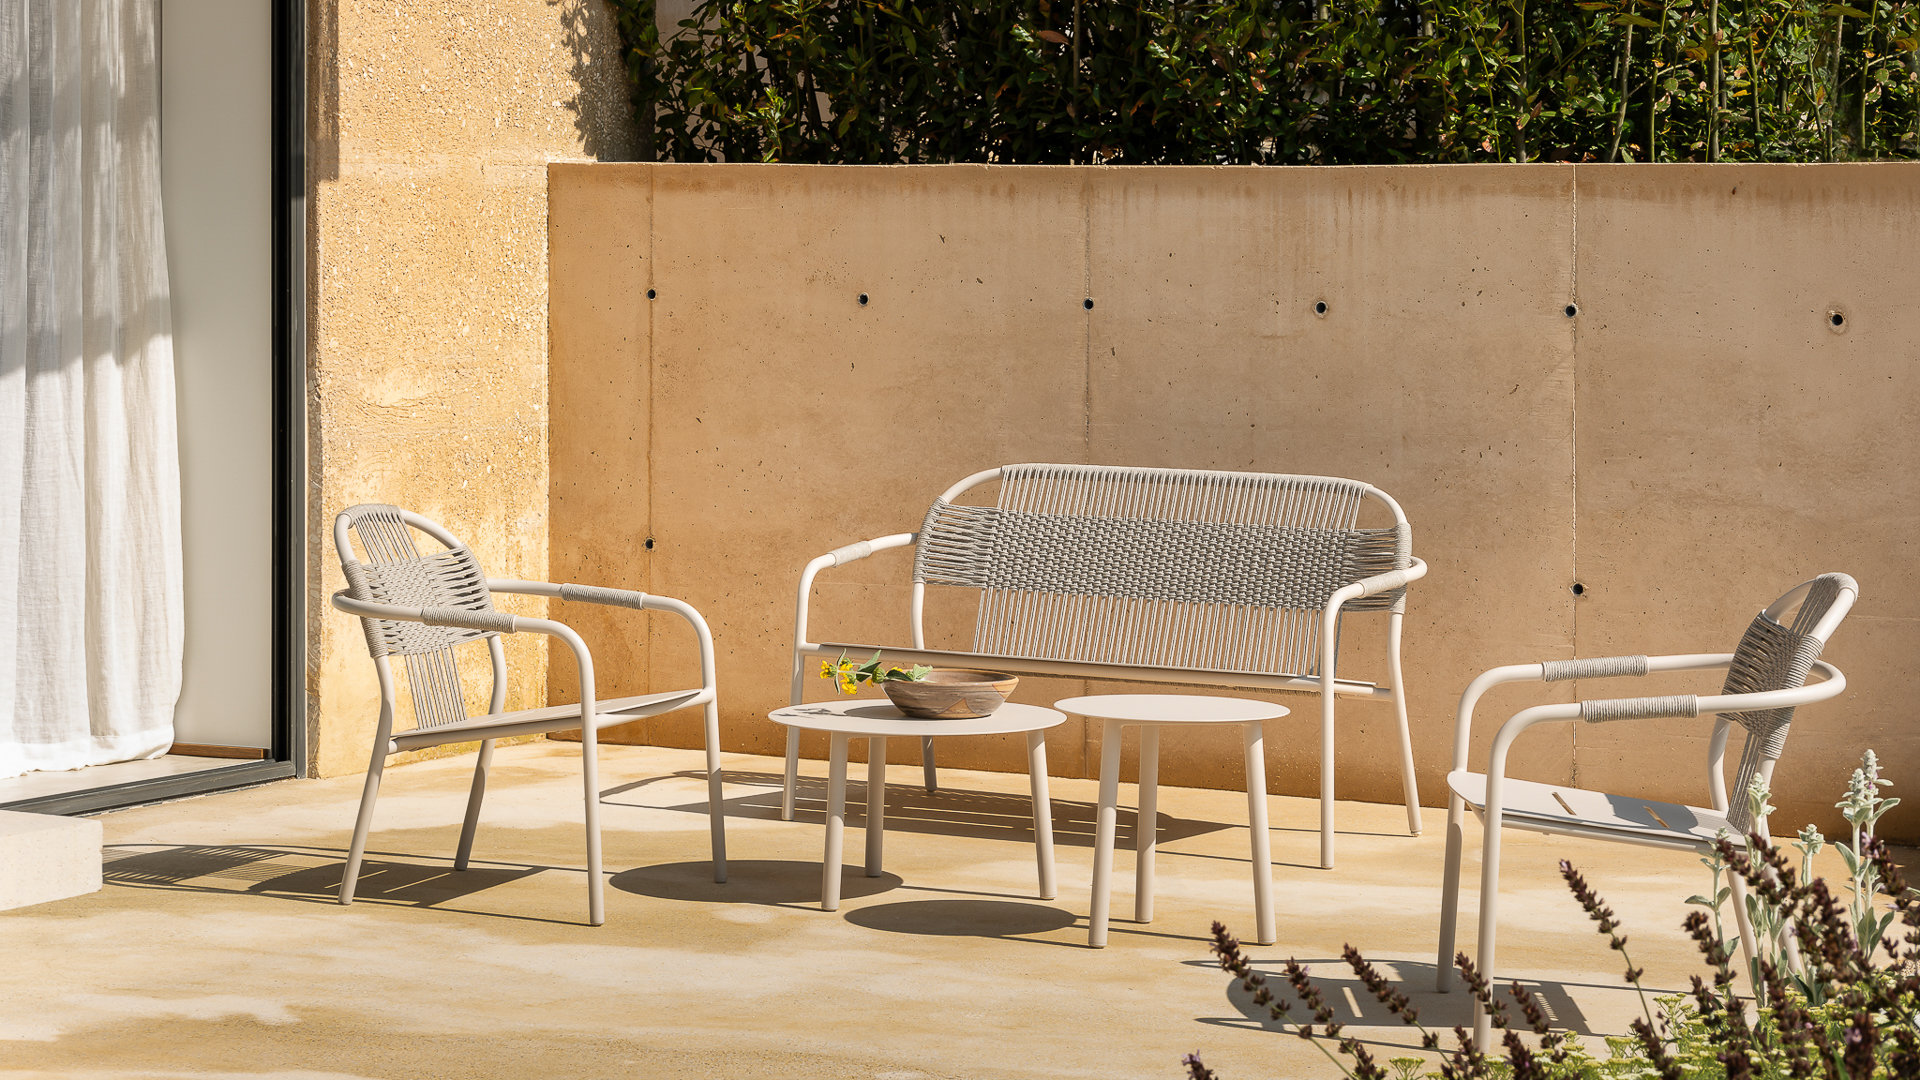 Outdoor furniture industry: What are the sustainability challenges for 2024?